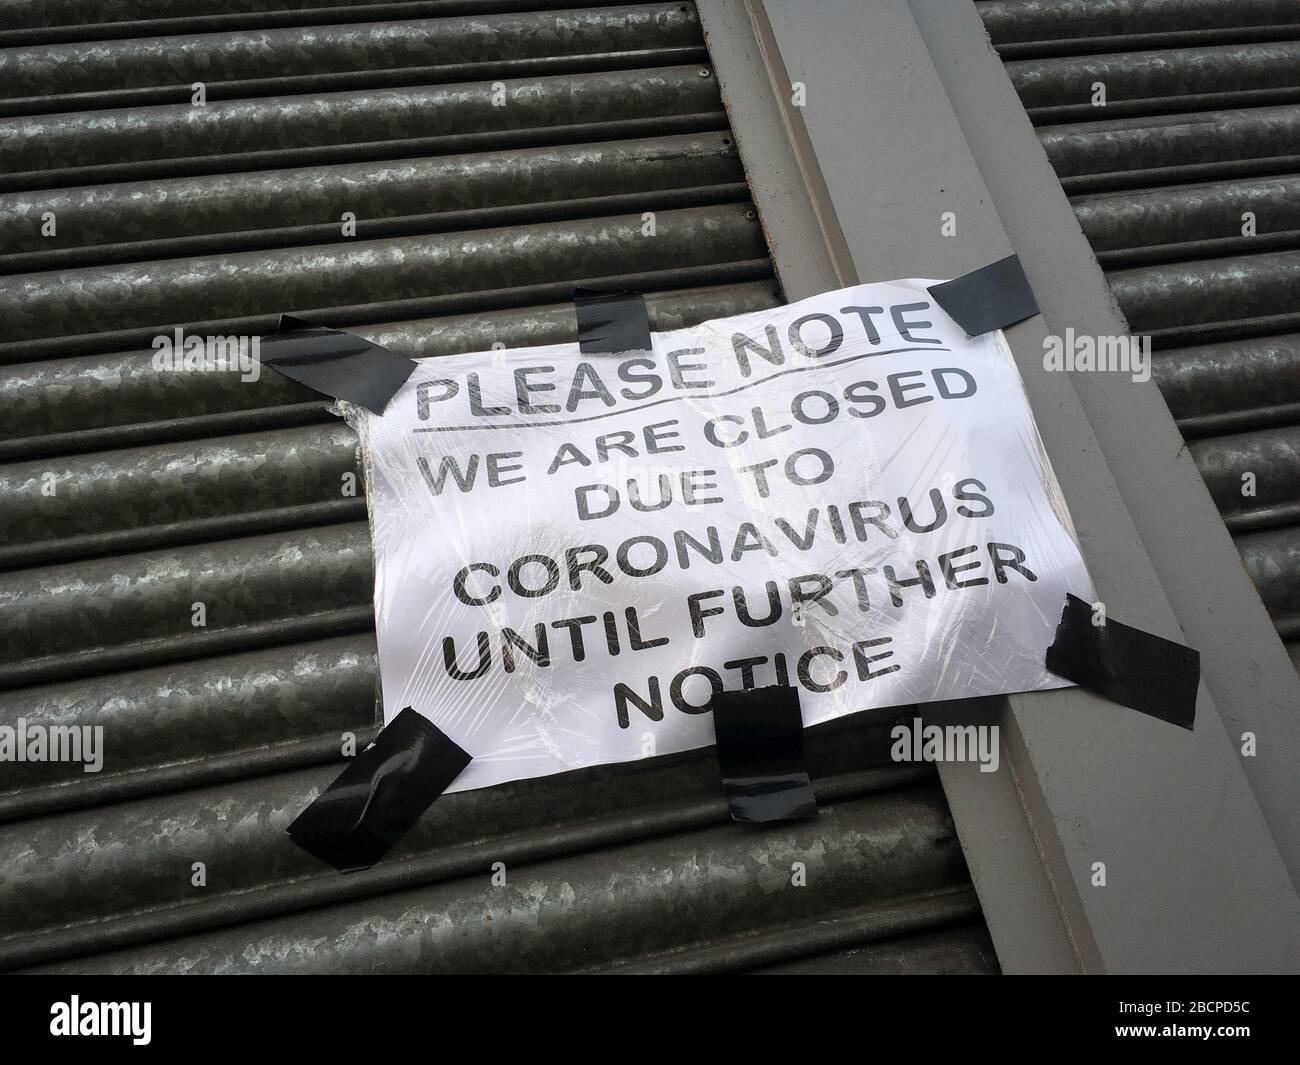 Glasgow, UK, 5 April 2020. Empty streets in the city centre, illustrating that social distancing guidelines and 'stay at home' advisories are being adhered to in the time of Coronavirus COVID-19 pandemic crisis. Photo credit:Jeremy Sutton-Hibbert/Alamy Live News. Stock Photo